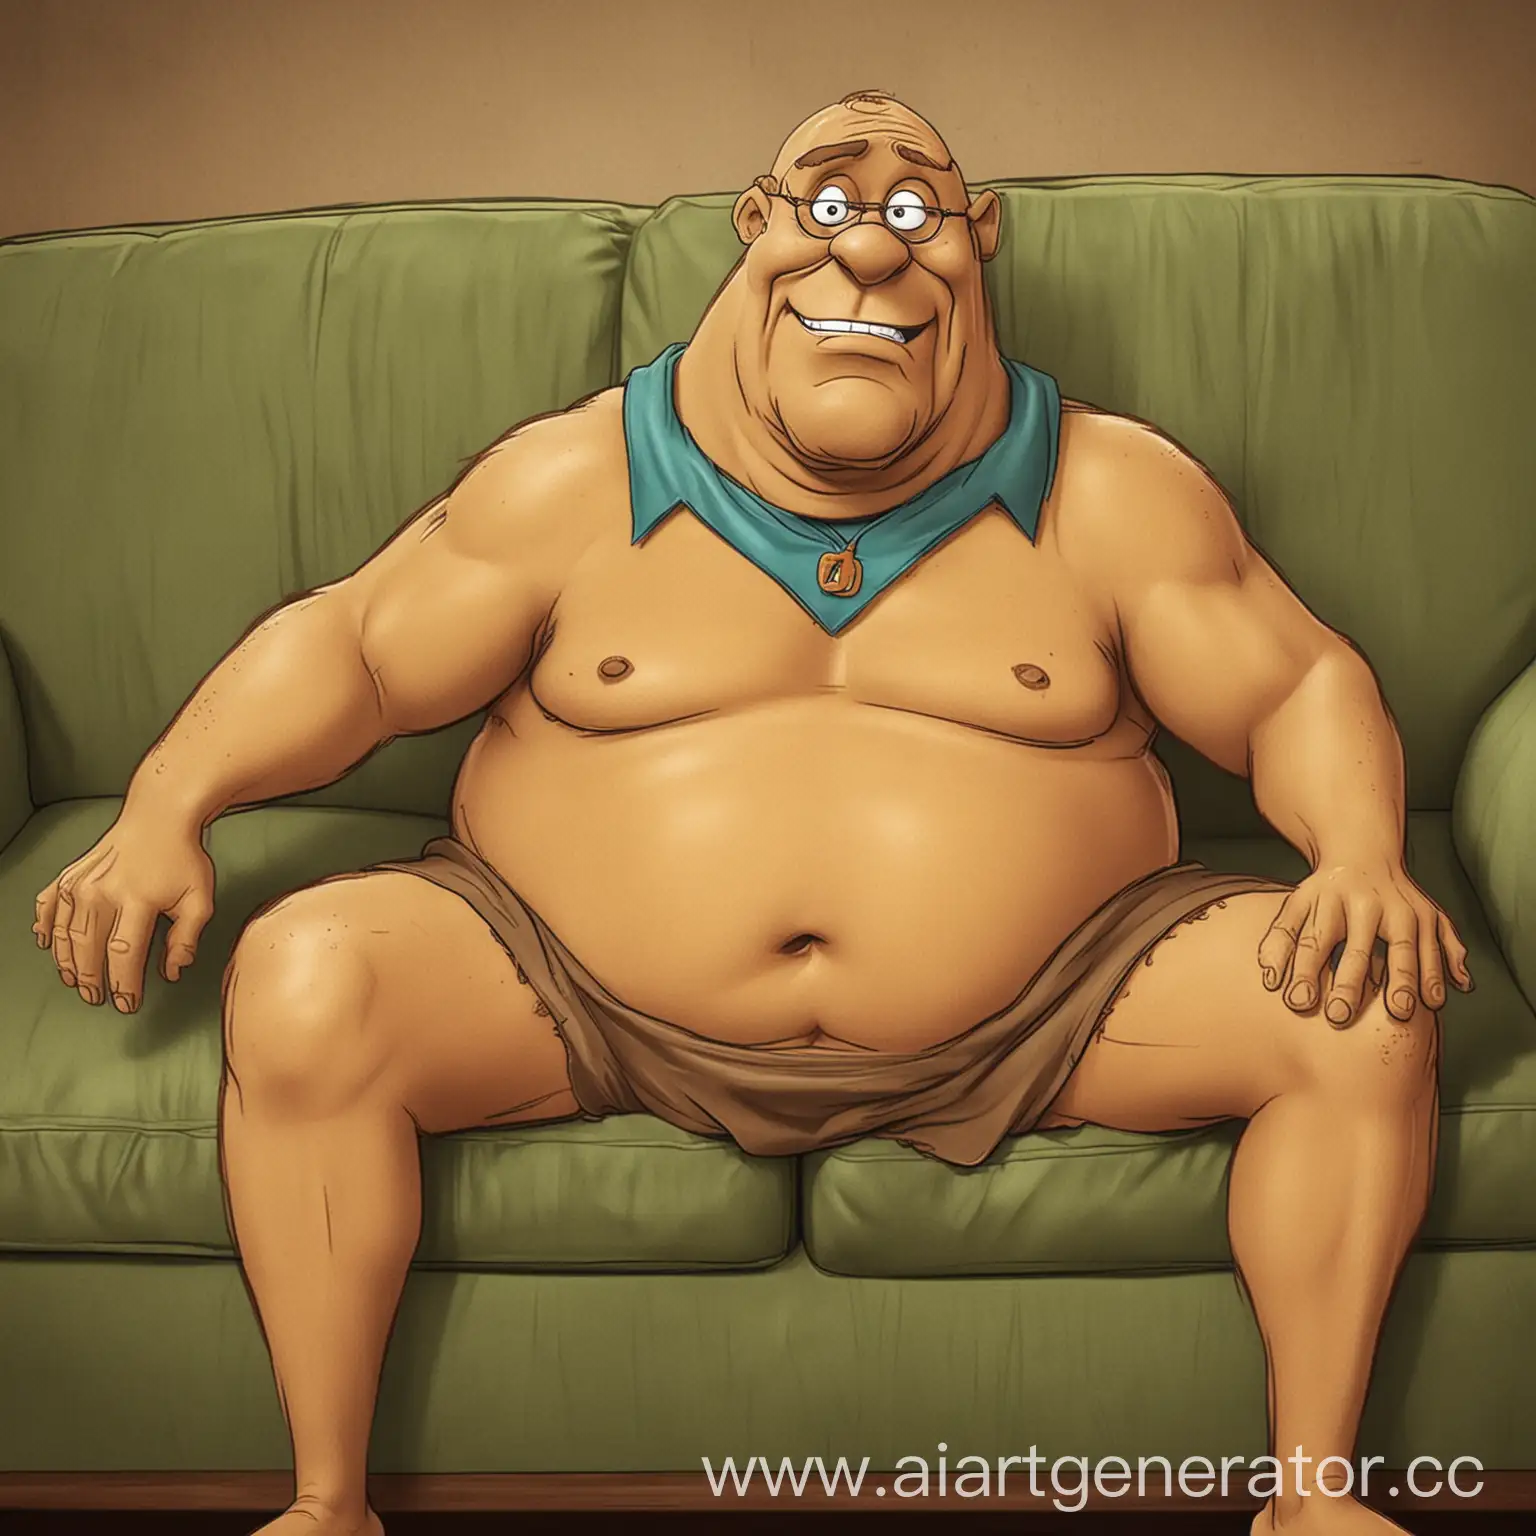 Chubby-Bald-Scooby-Doo-Relaxing-on-a-Couch